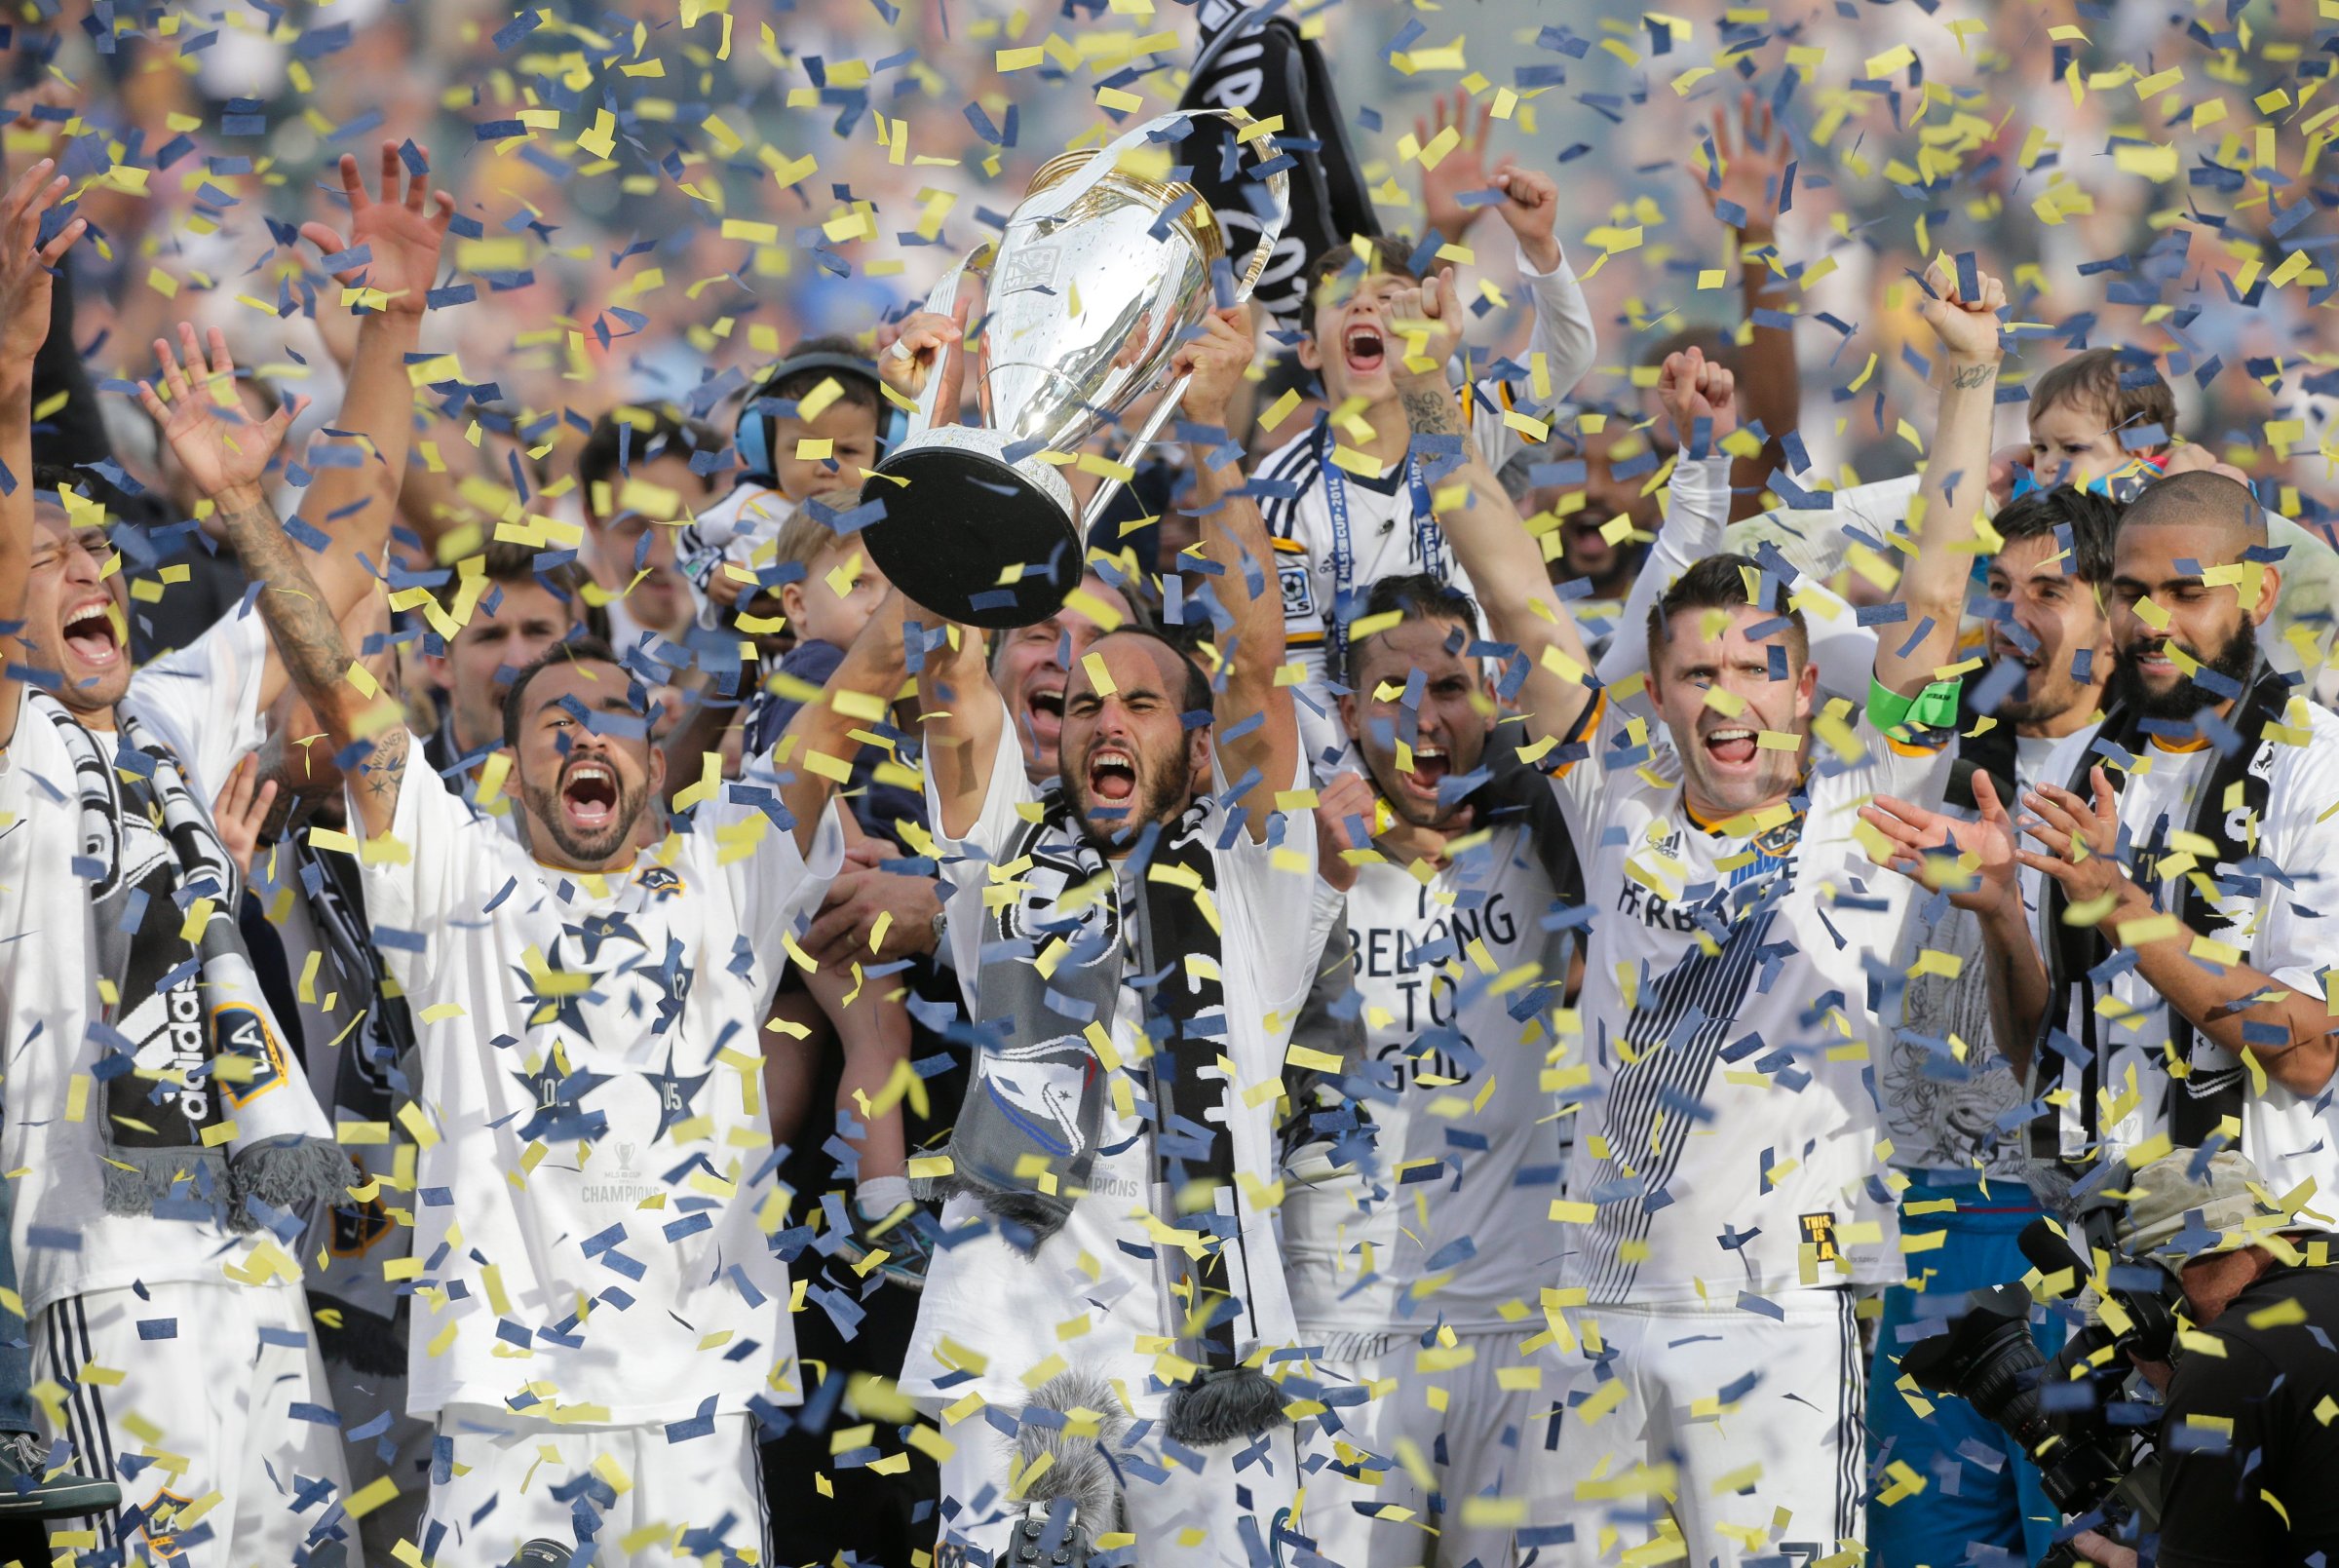 Los Angeles Galaxy's Landon Donovan hoists the trophy as he and teammates celebrate after winning the MLS Cup championship soccer match against the New England Revolution on Dec. 7, 2014, in Carson, Calif.